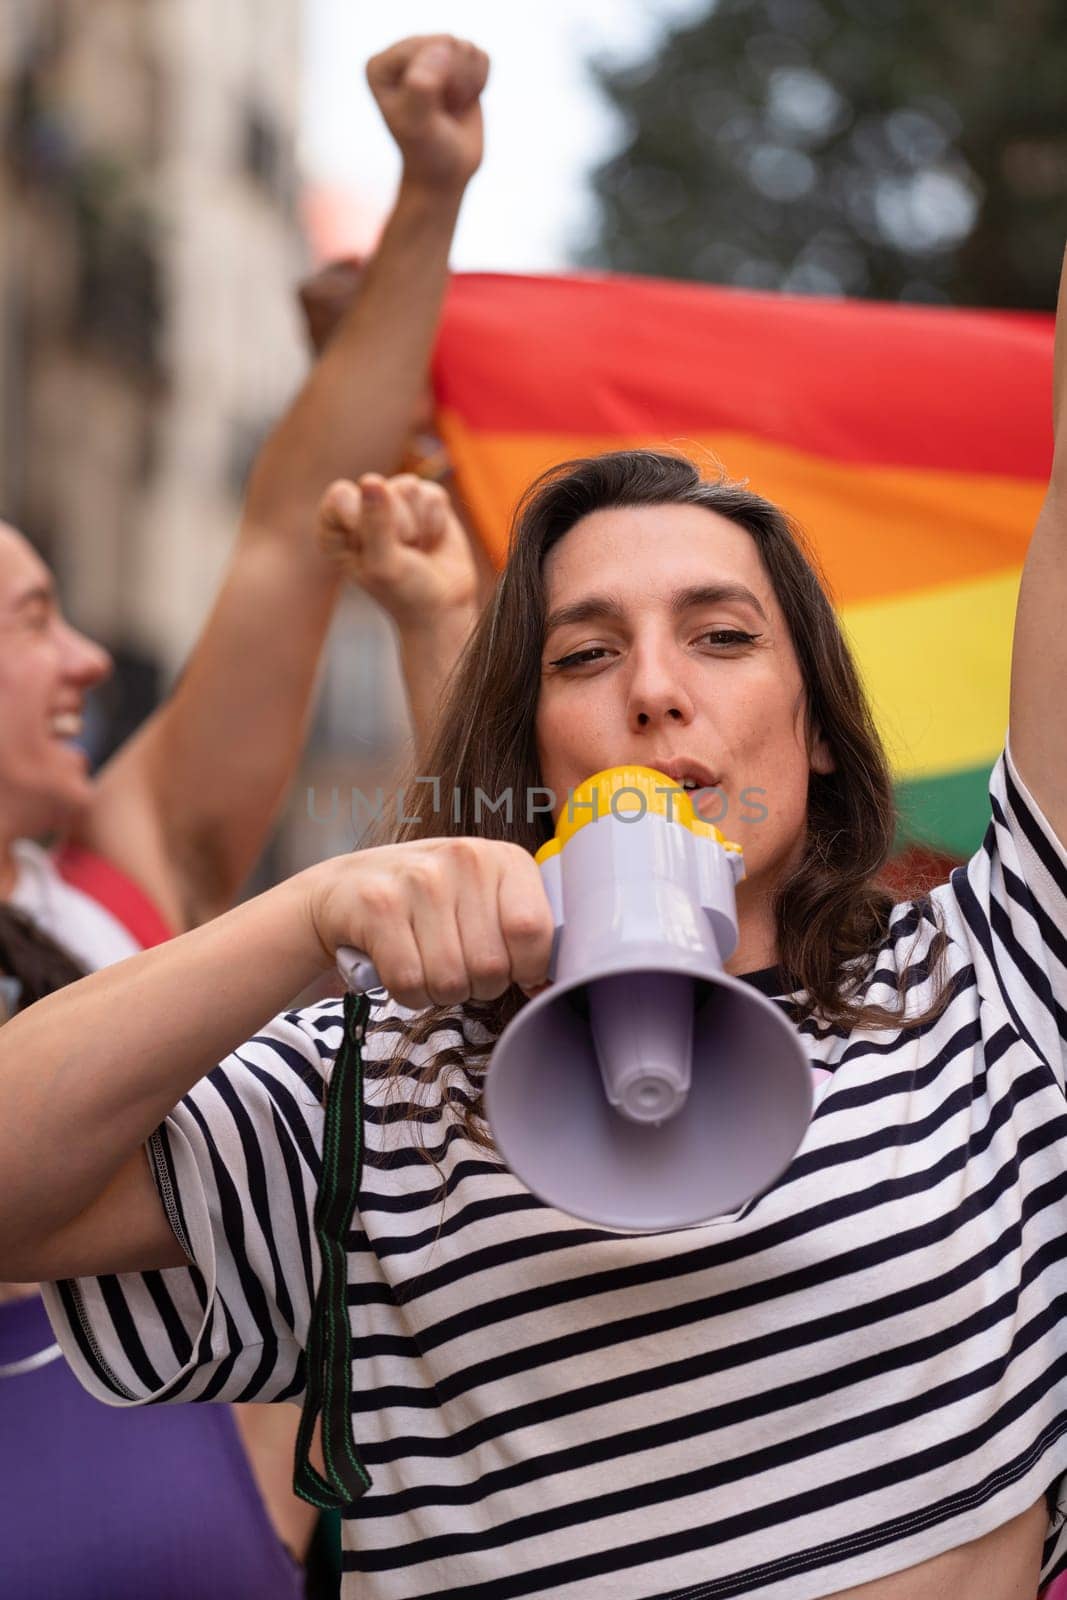 Transgender woman screaming during a protest to support LGBTQ community. Vertical by papatonic